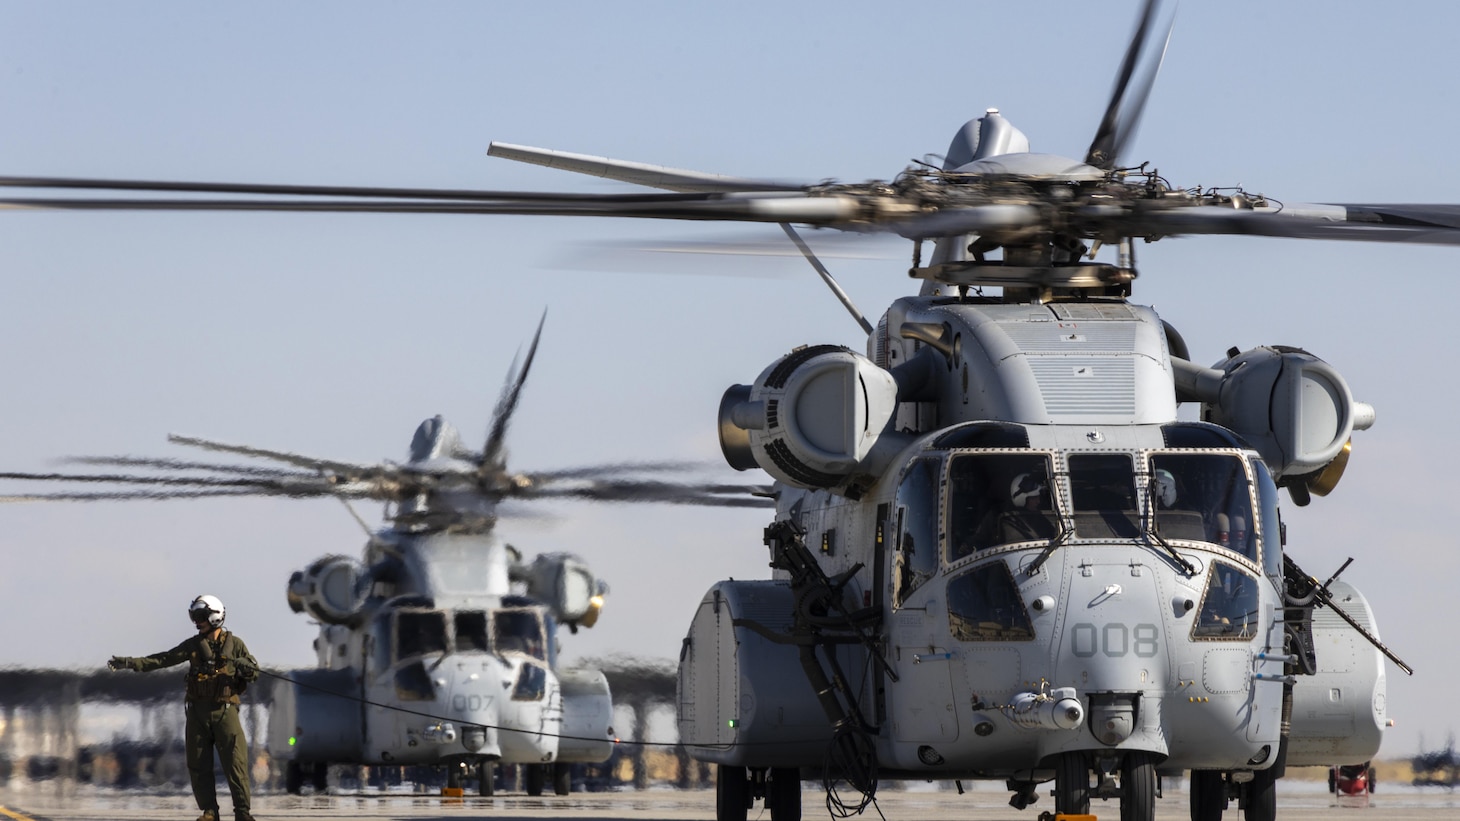 U.S. Marines with Marine Heavy Helicopter Squadron (HMH) 461 prepare for takeoff in CH-53K King Stallions at Mountain Home Air Force Base, Idaho, Aug. 16.